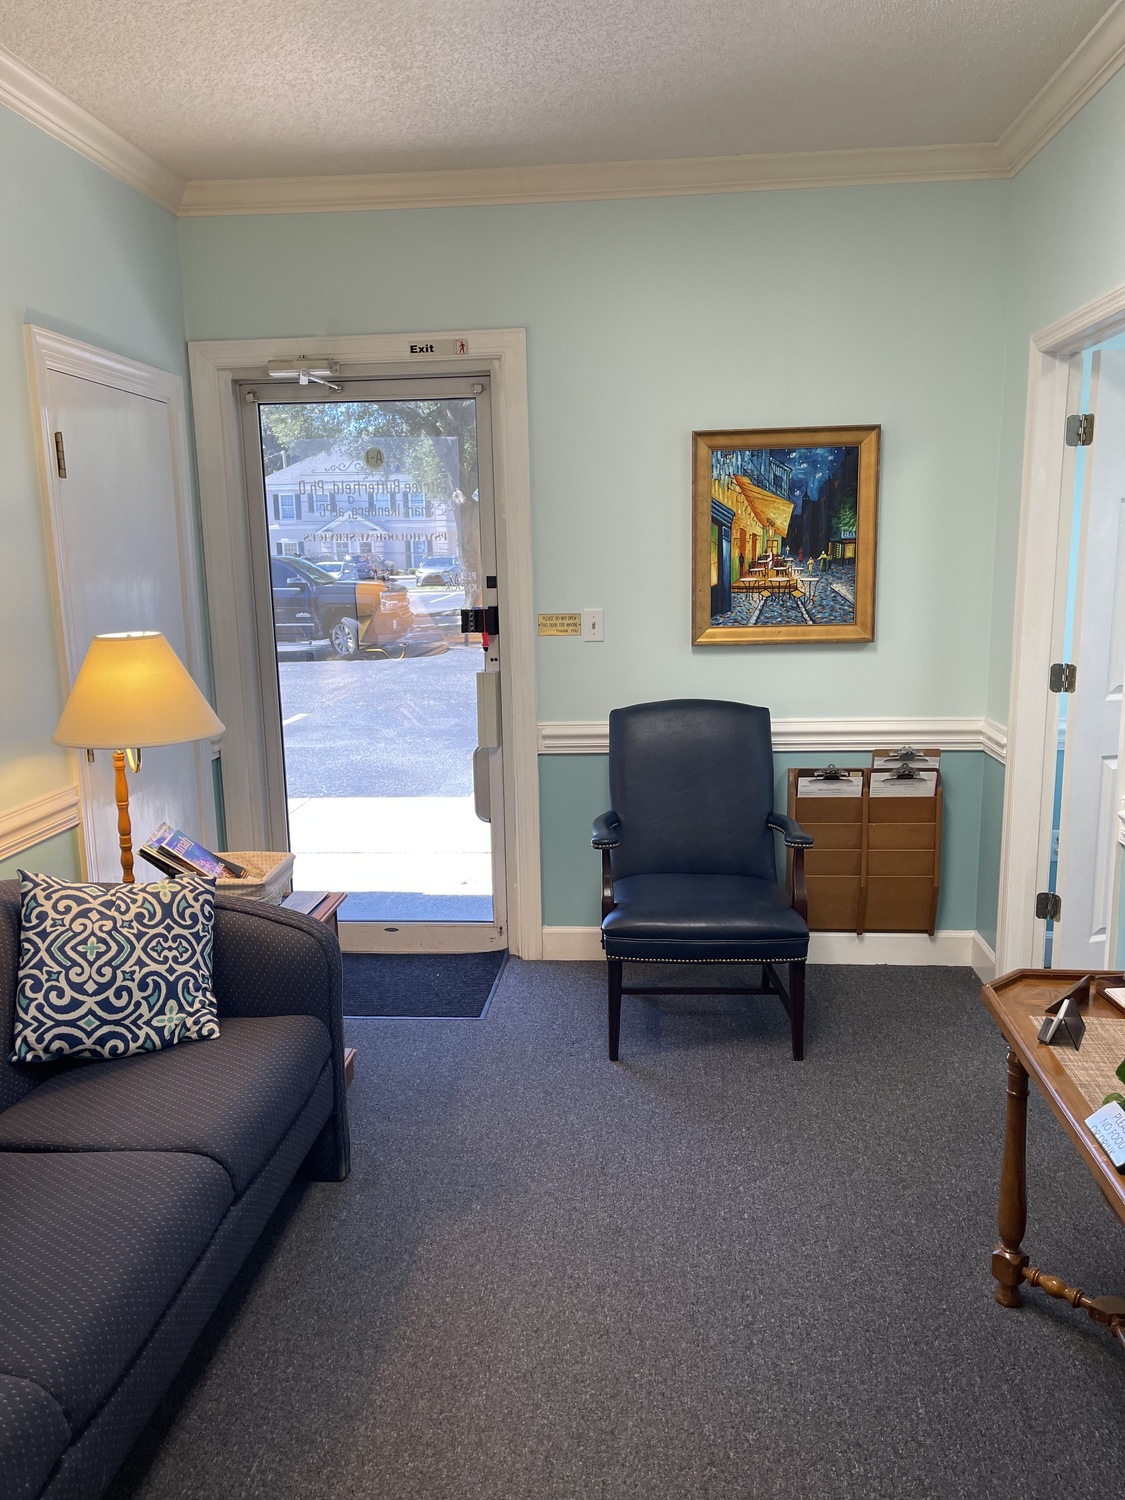 Gallery Photo of Entrance/Waiting Room